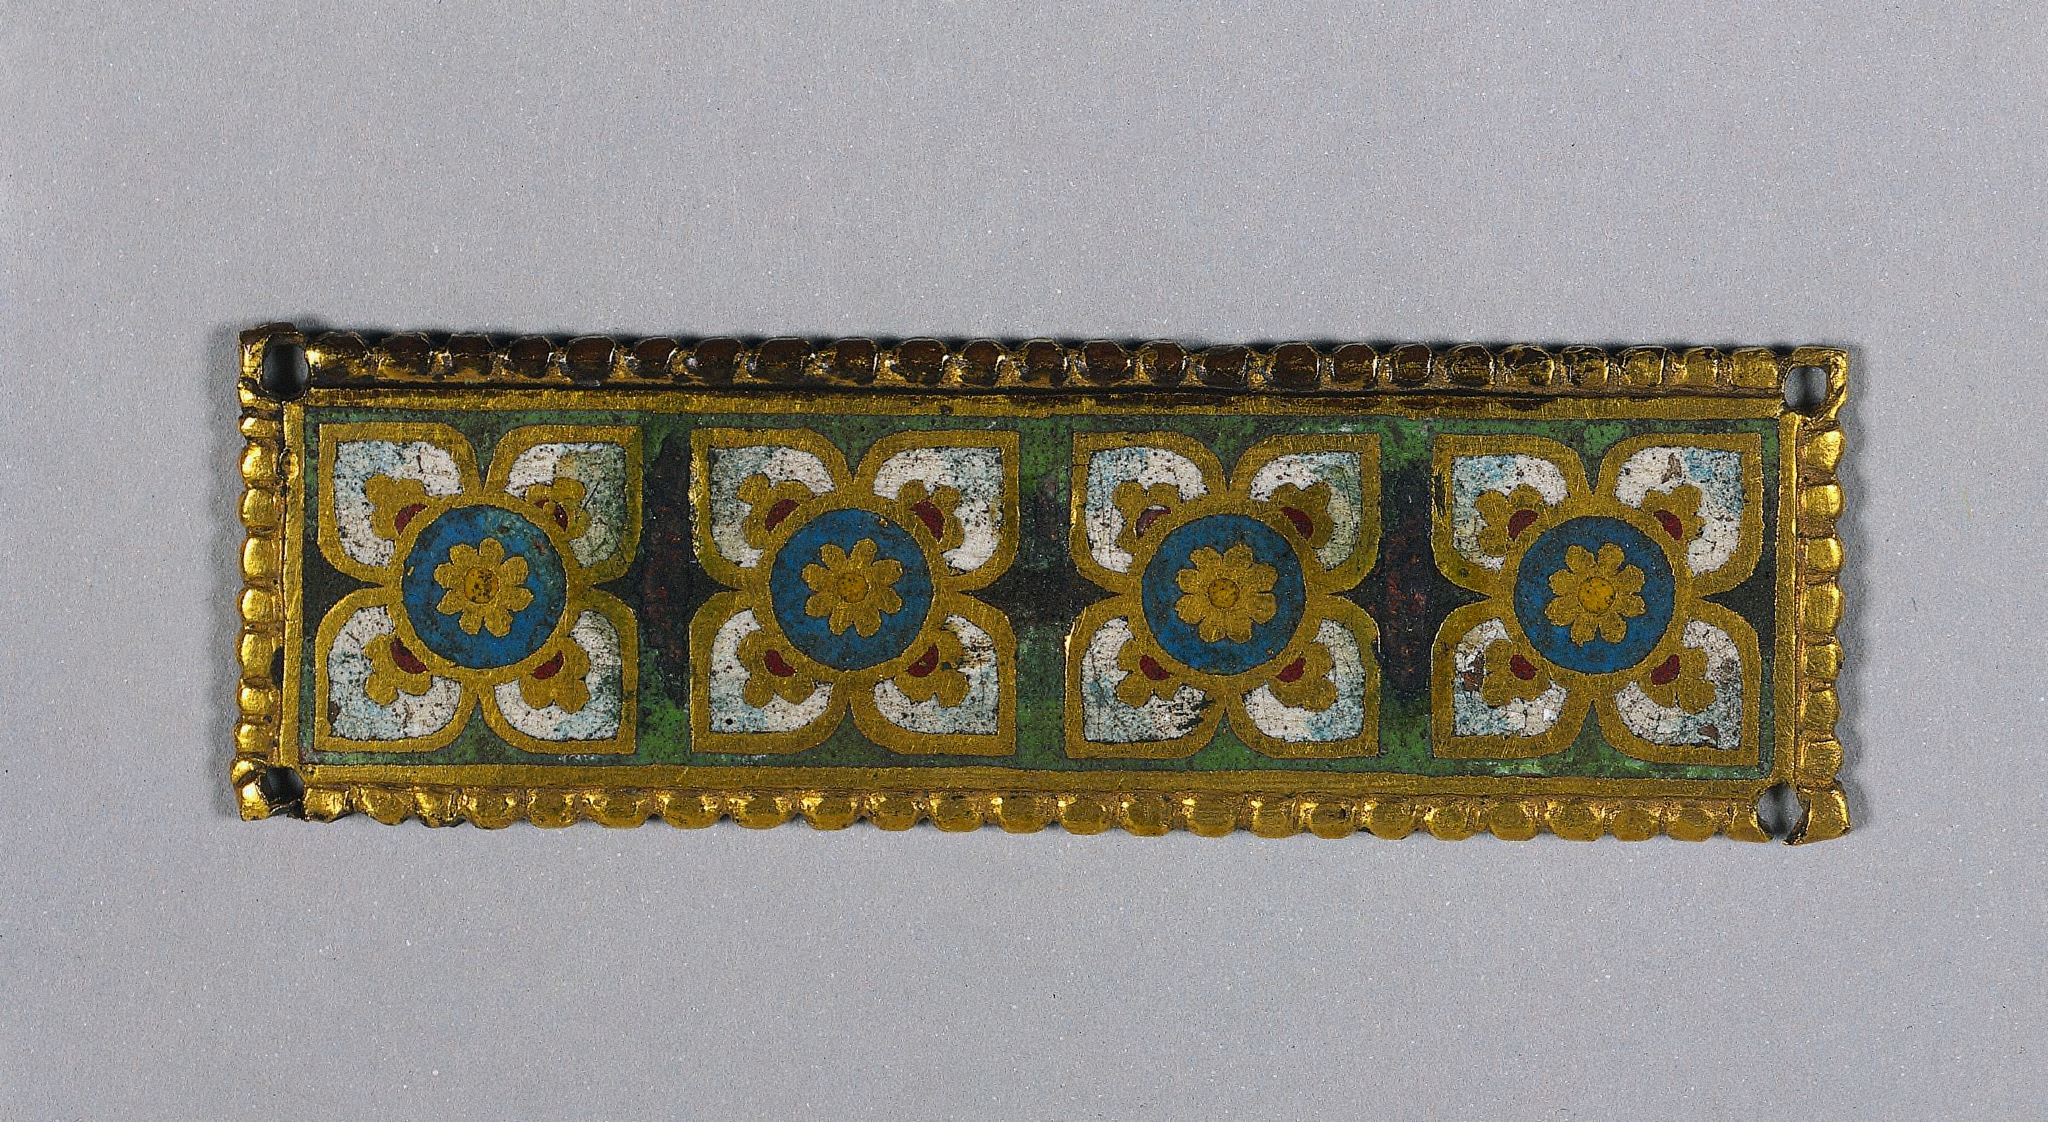 Plaque, probably from a Reliquary Shrine